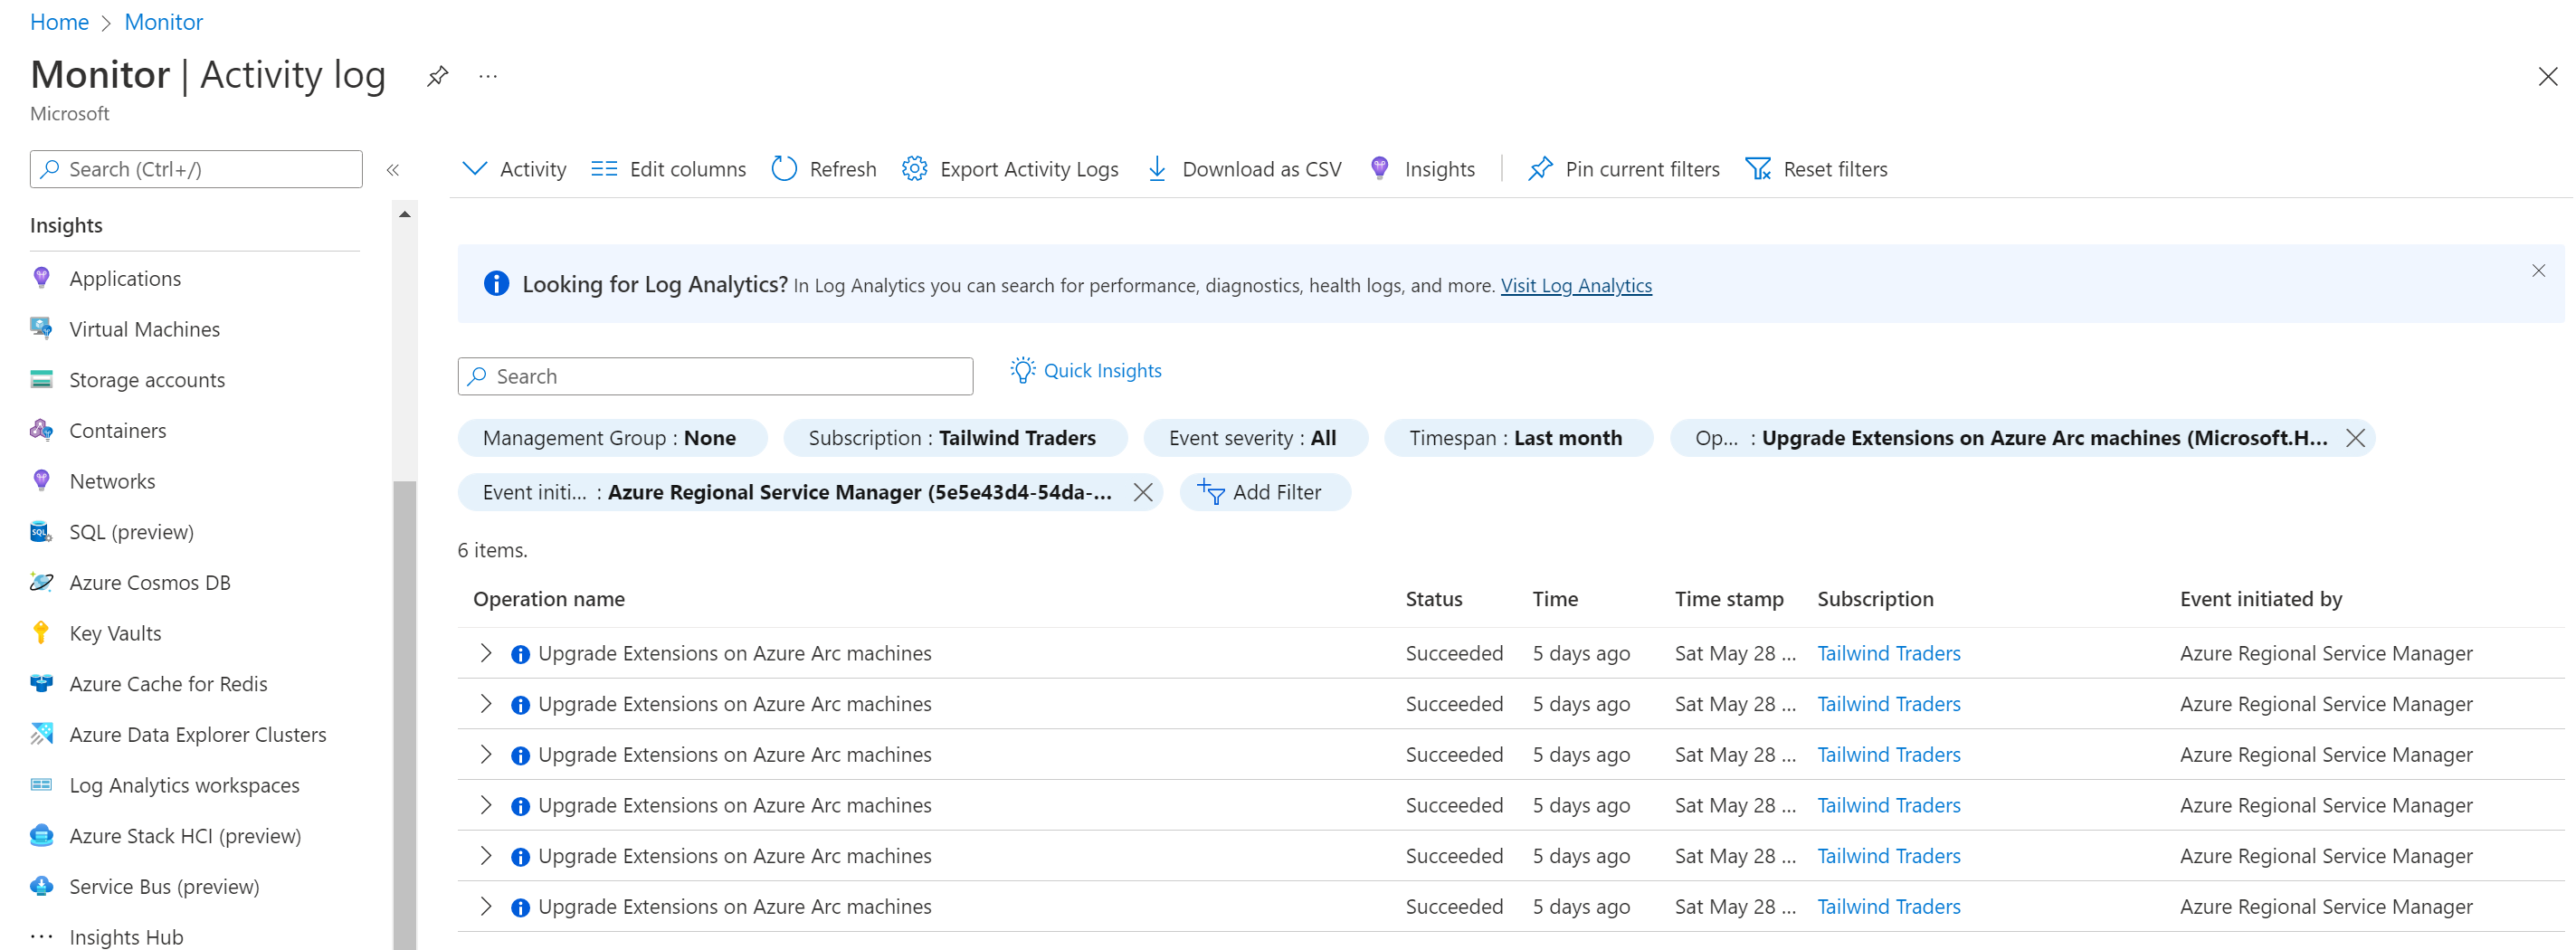 Azure Activity Log showing attempts to automatically upgrade extensions on Azure Arc-enabled servers.